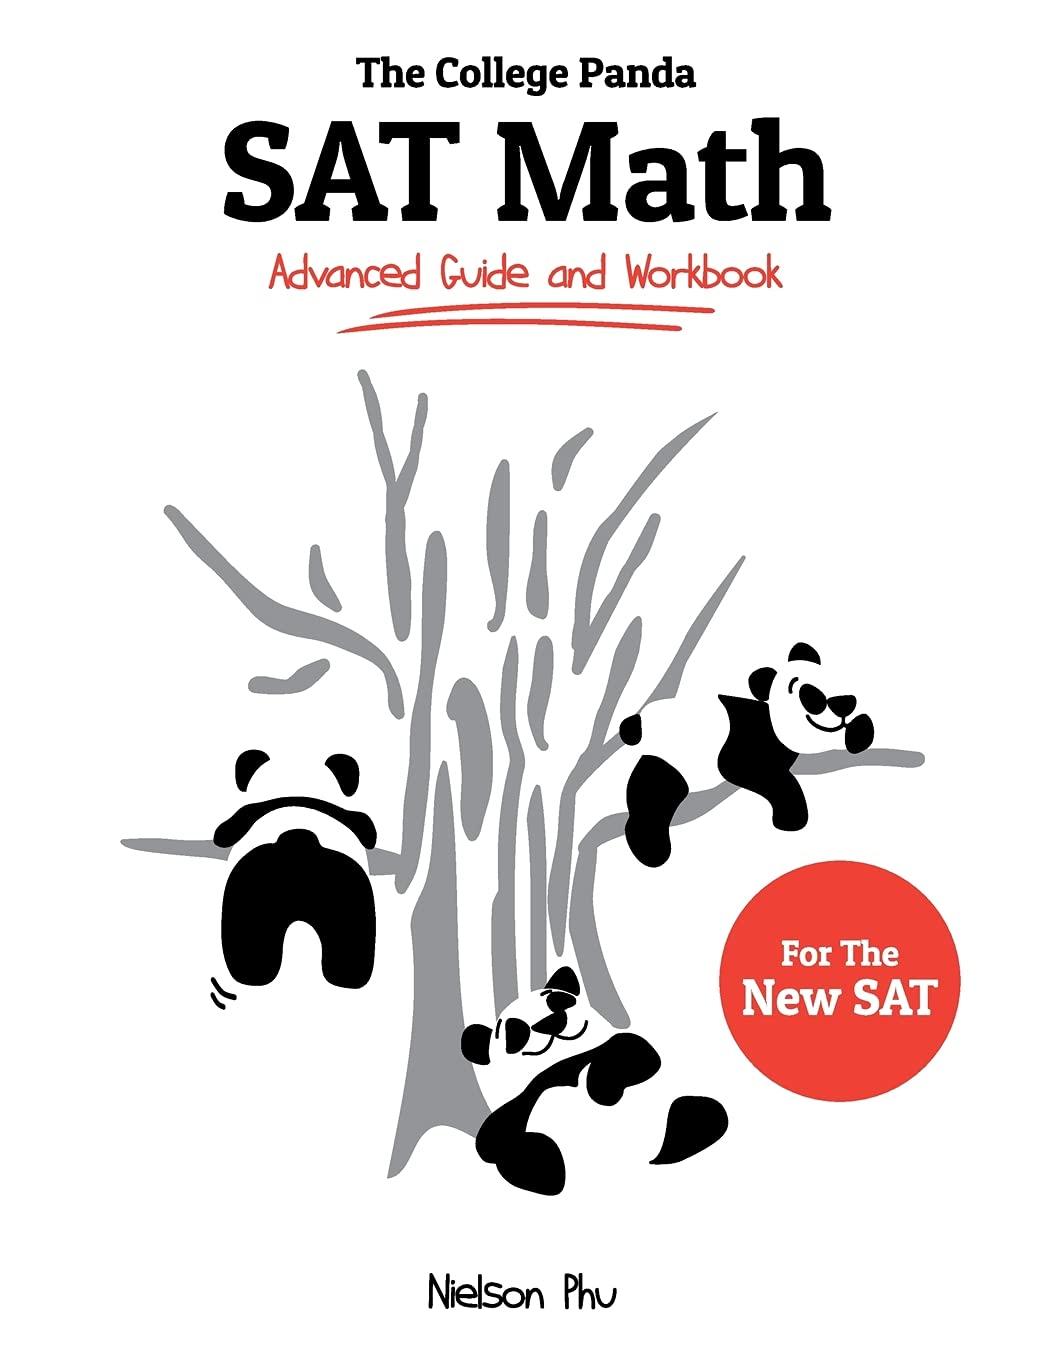 The College Pandas SAT Math Advanced Guide And Workbook For The New SAT